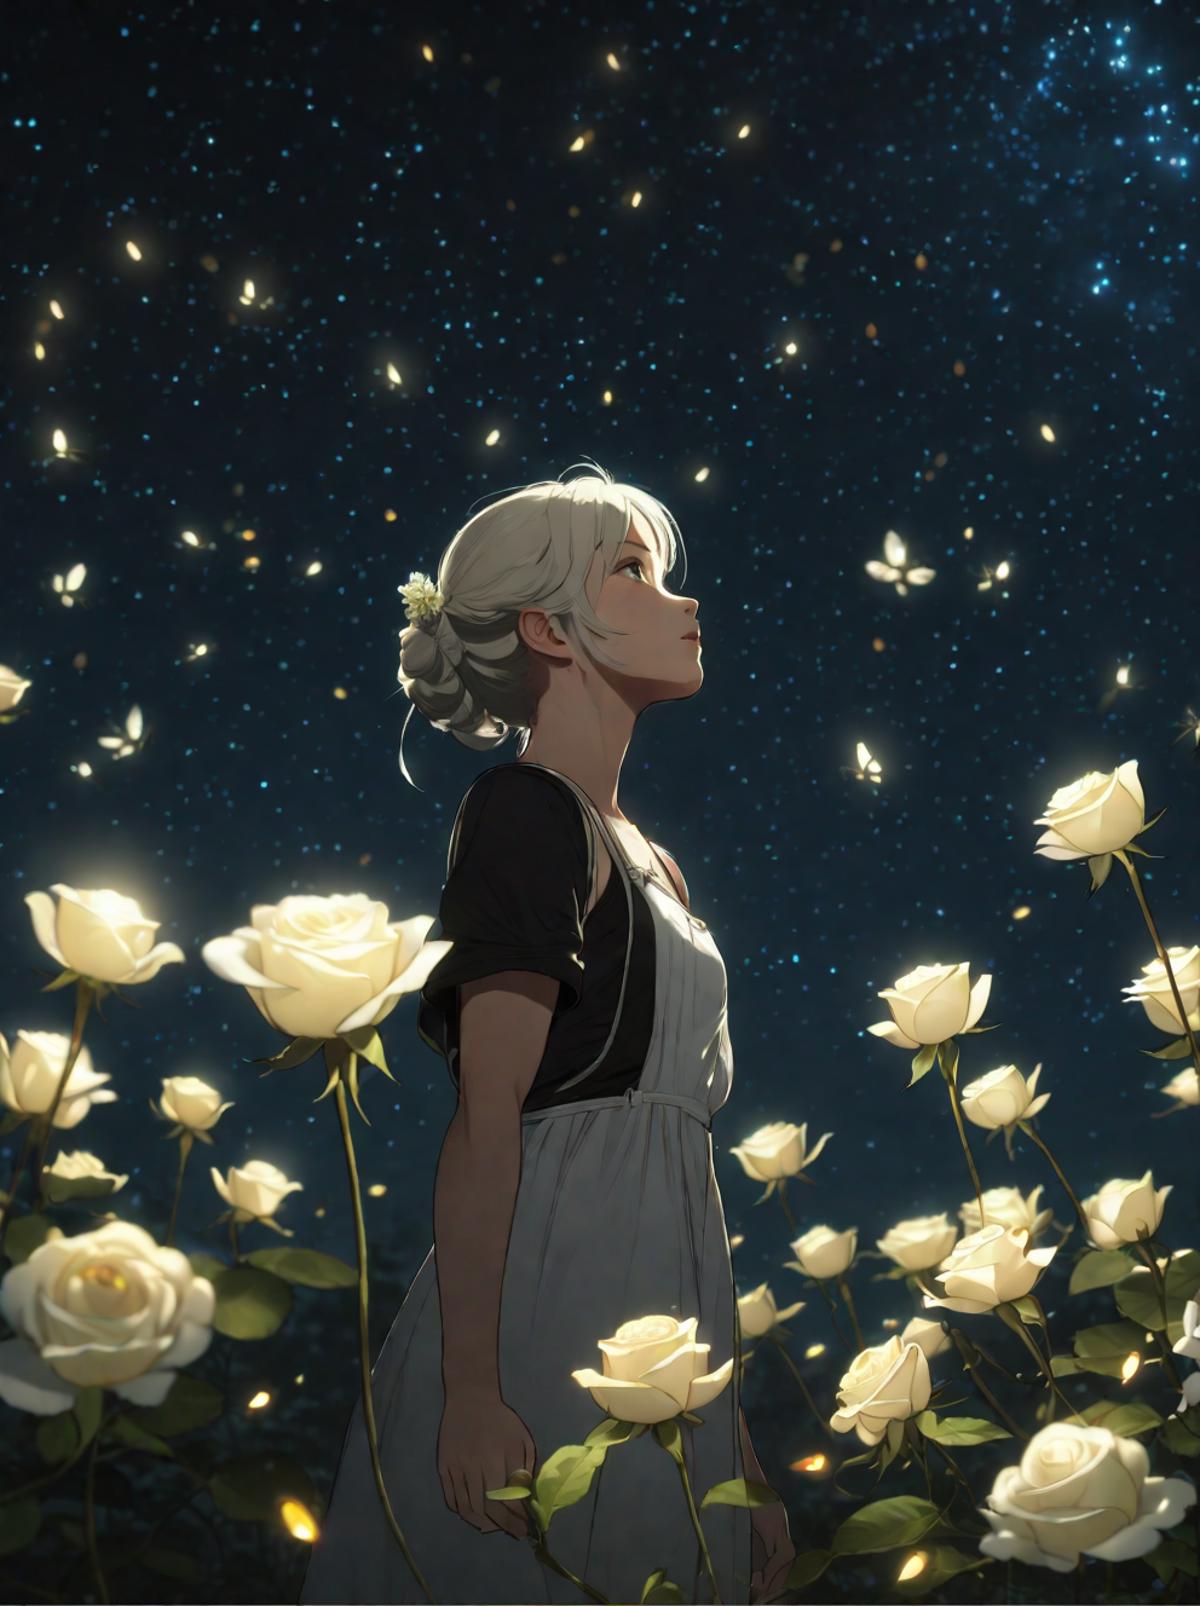 A woman standing in a field of white roses with a starry sky in the background.